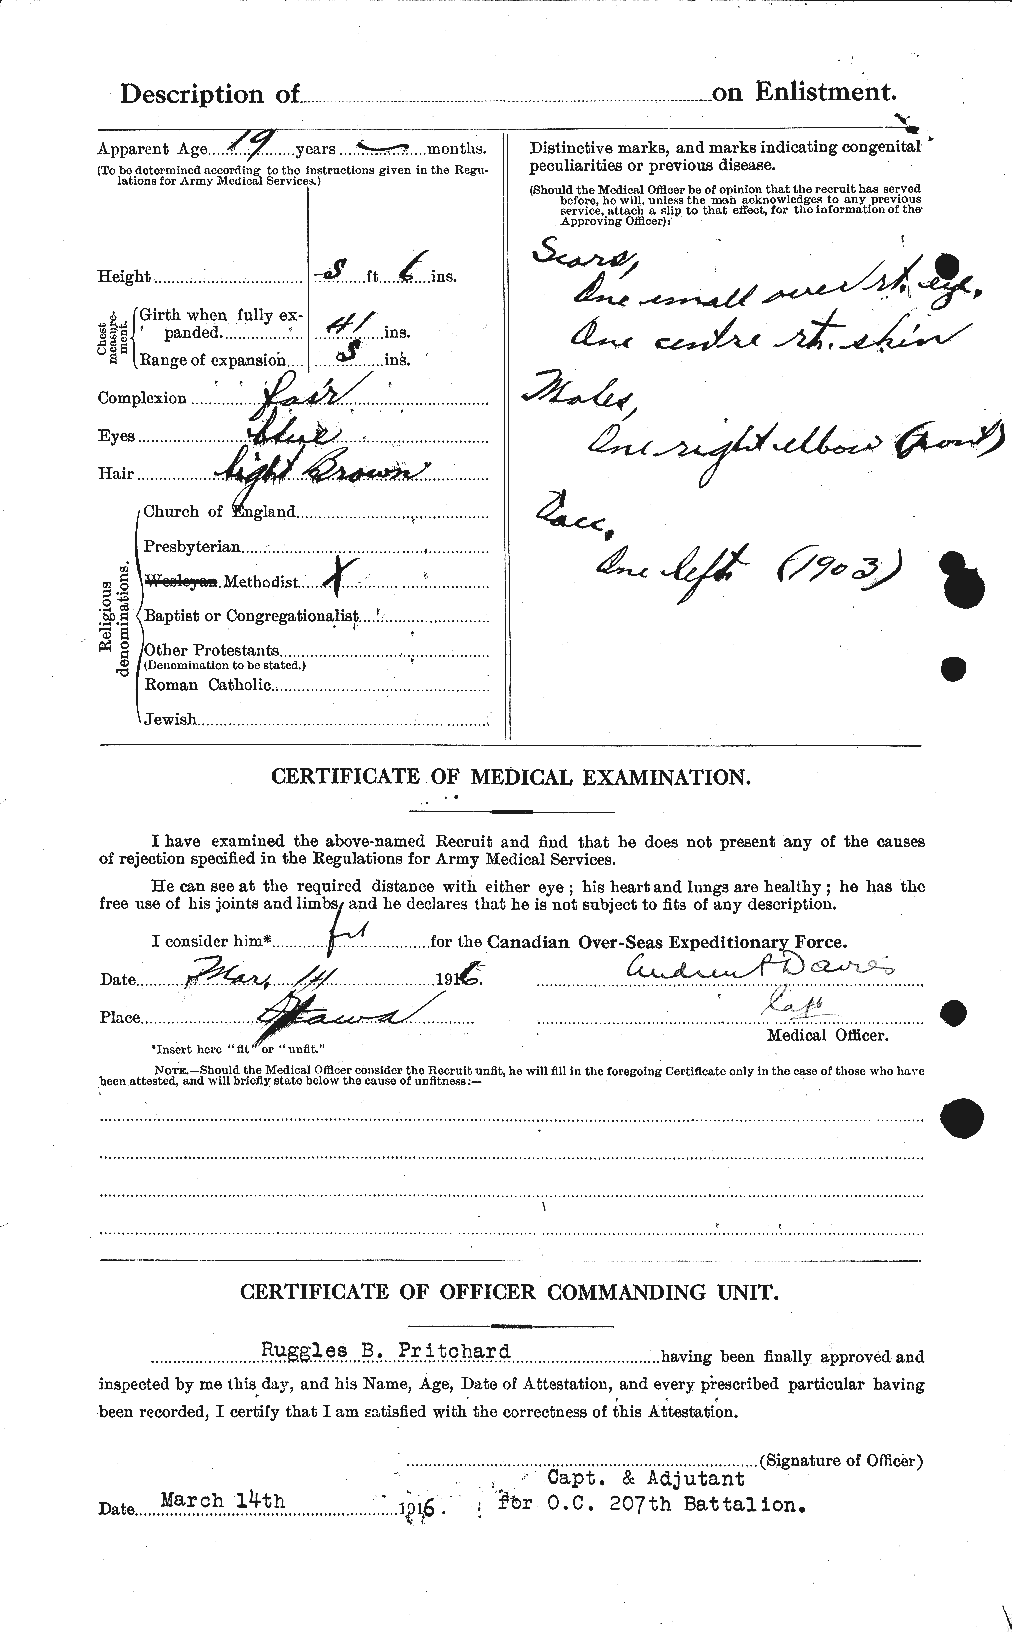 Personnel Records of the First World War - CEF 588603b